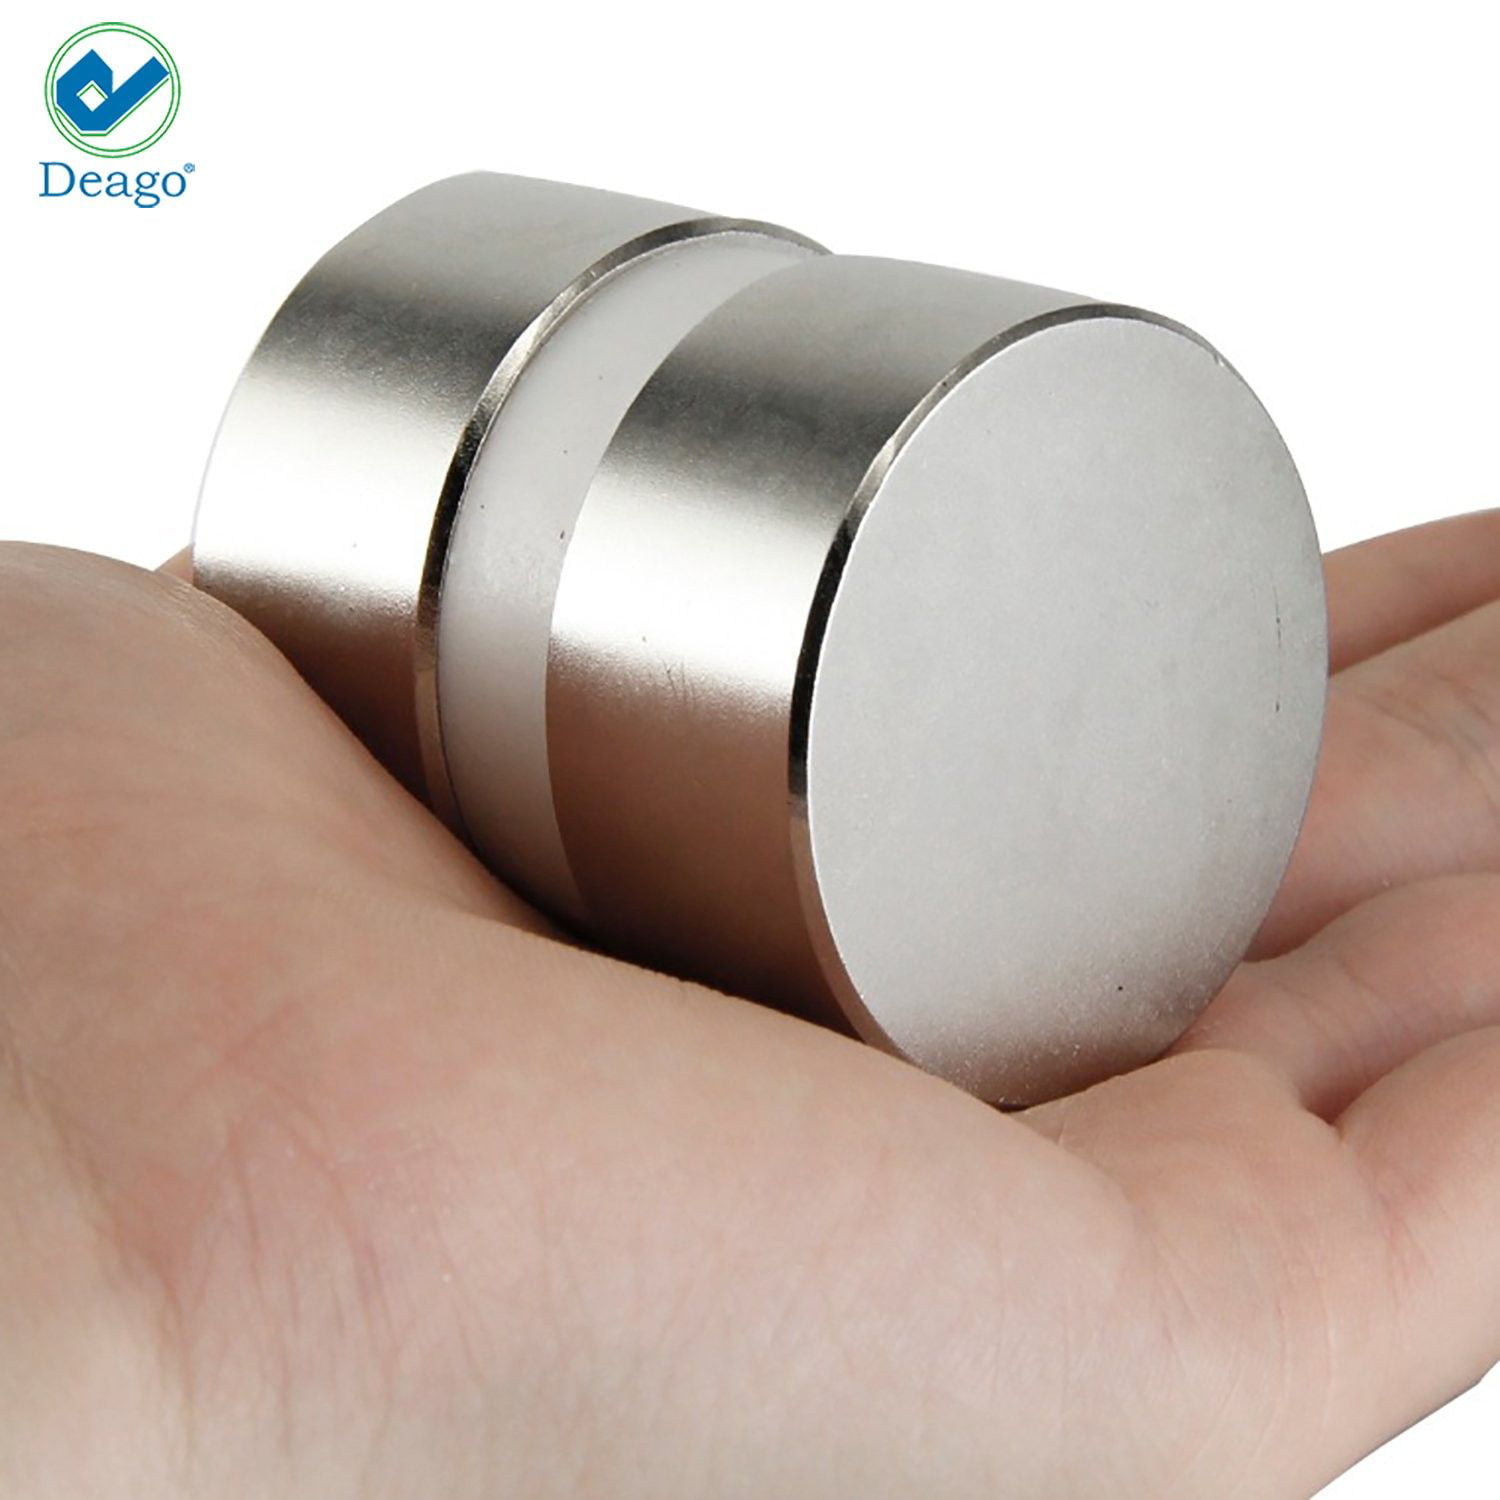 2pc 60 x 40 x 20 mm N35 Super Strong Block Permanet Neodymium Magnets Rare Earth Powerful Magnet 